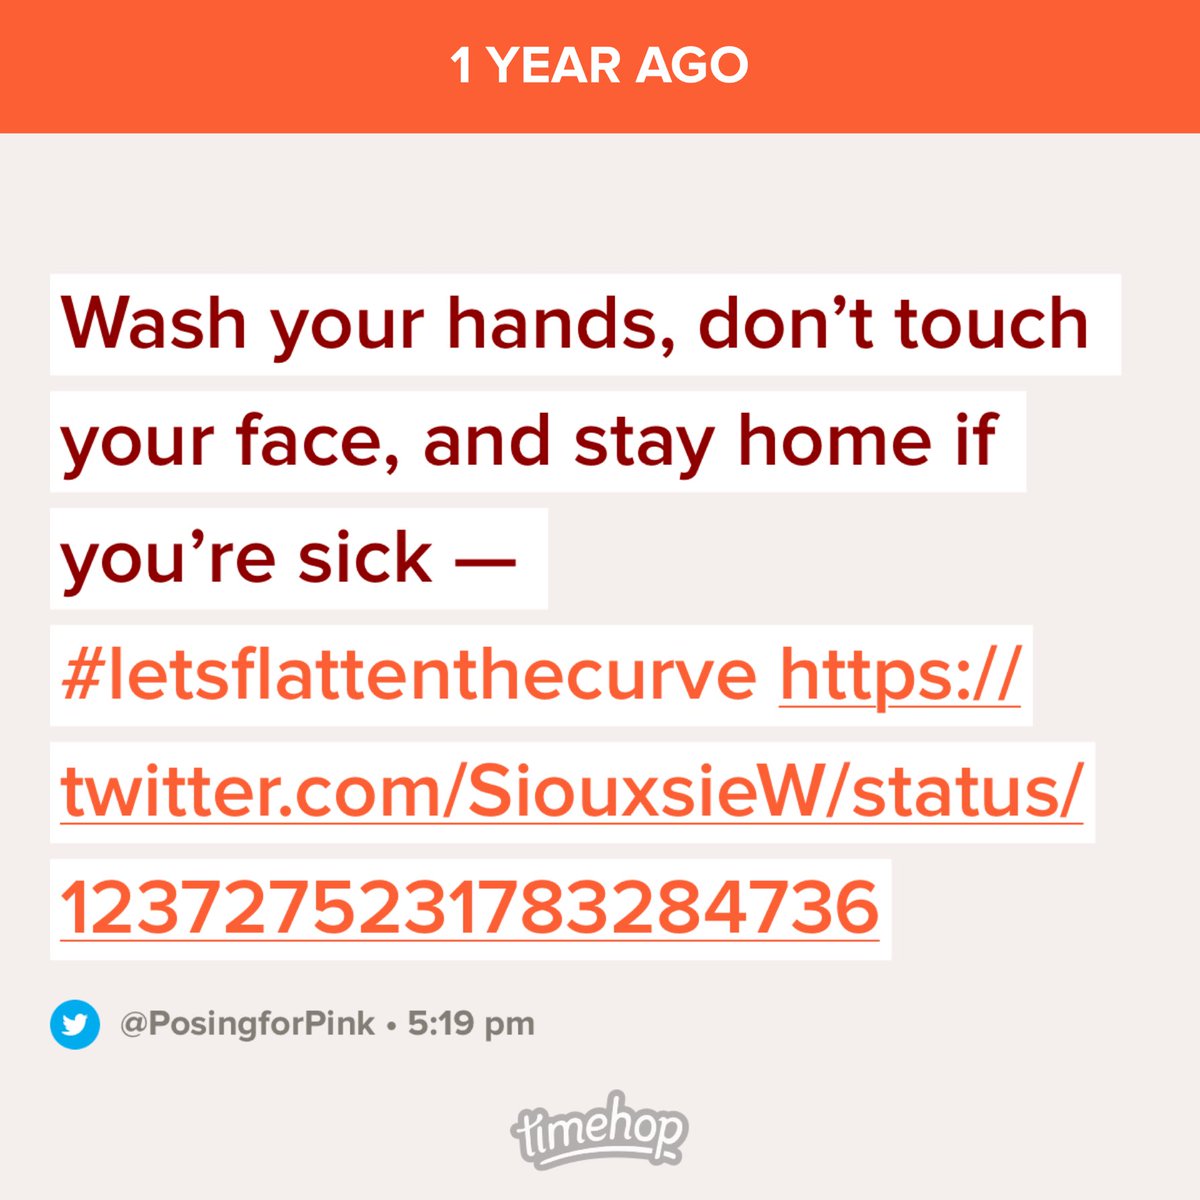 Good advice a year ago - updated for good advice today: #washyourhands #donttouchyourface just #stayhome + #wearamask